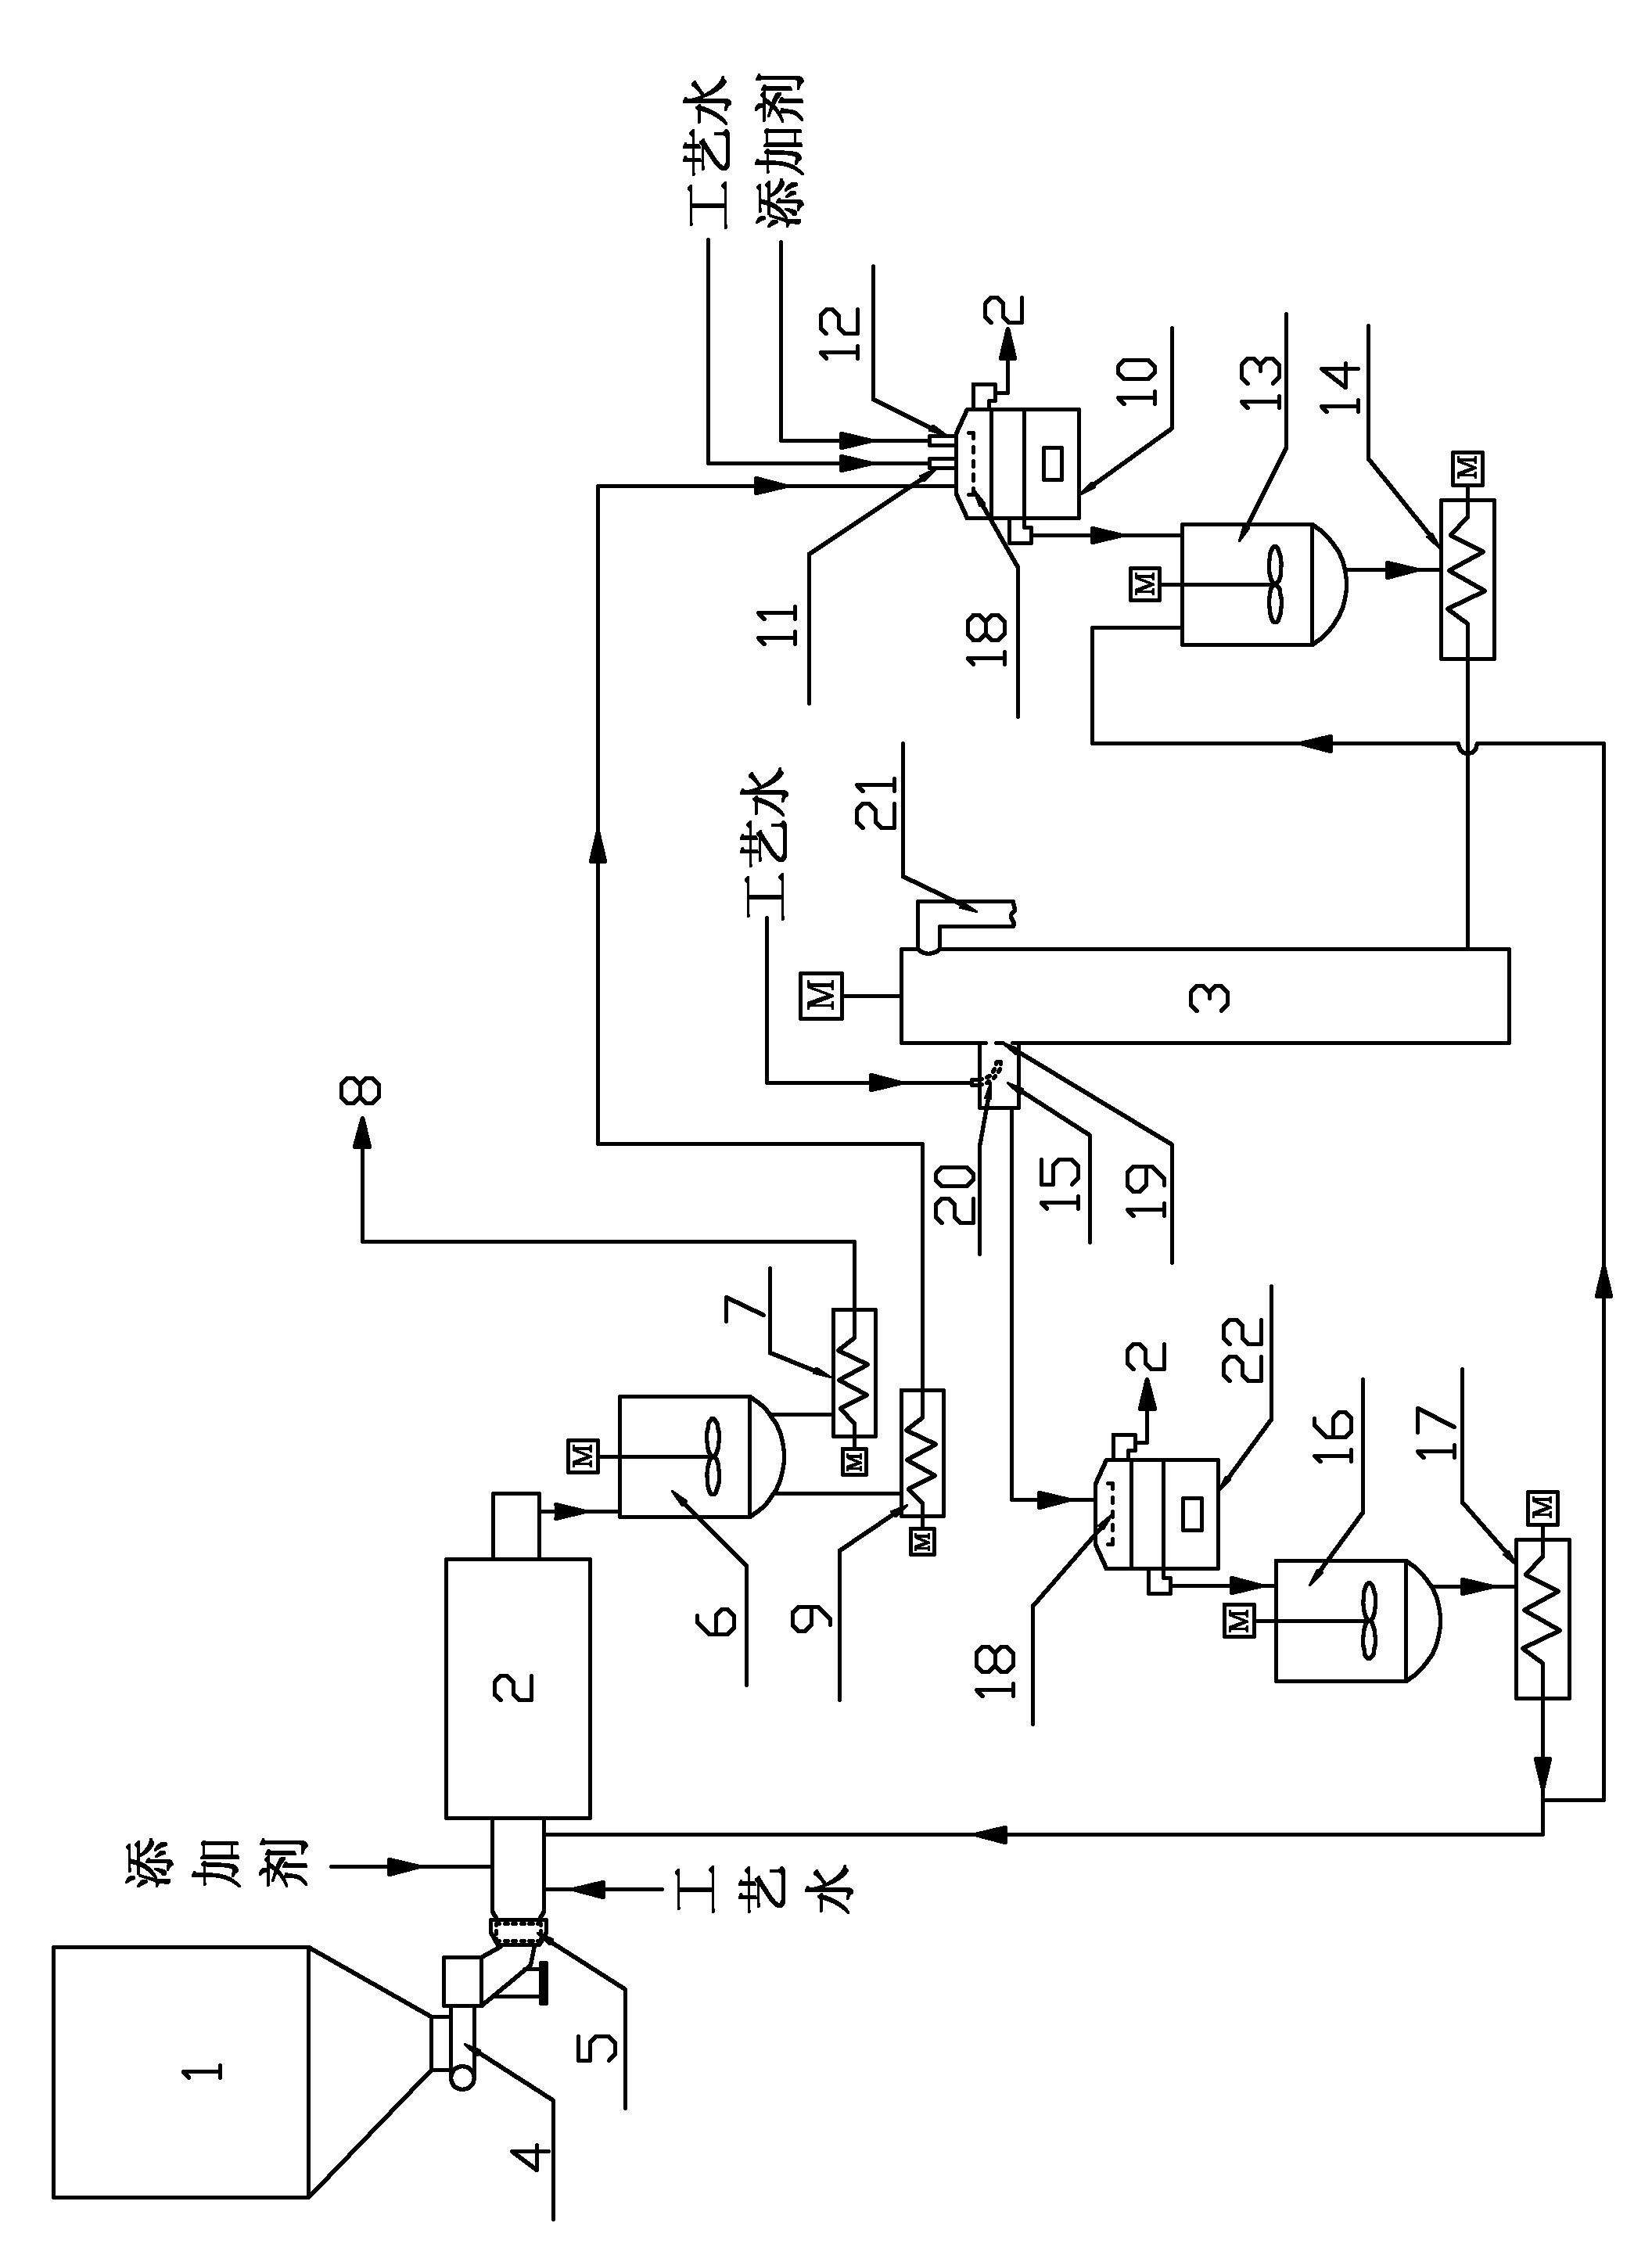 Gasified coal-water-slurry preparation process and corresponding production line